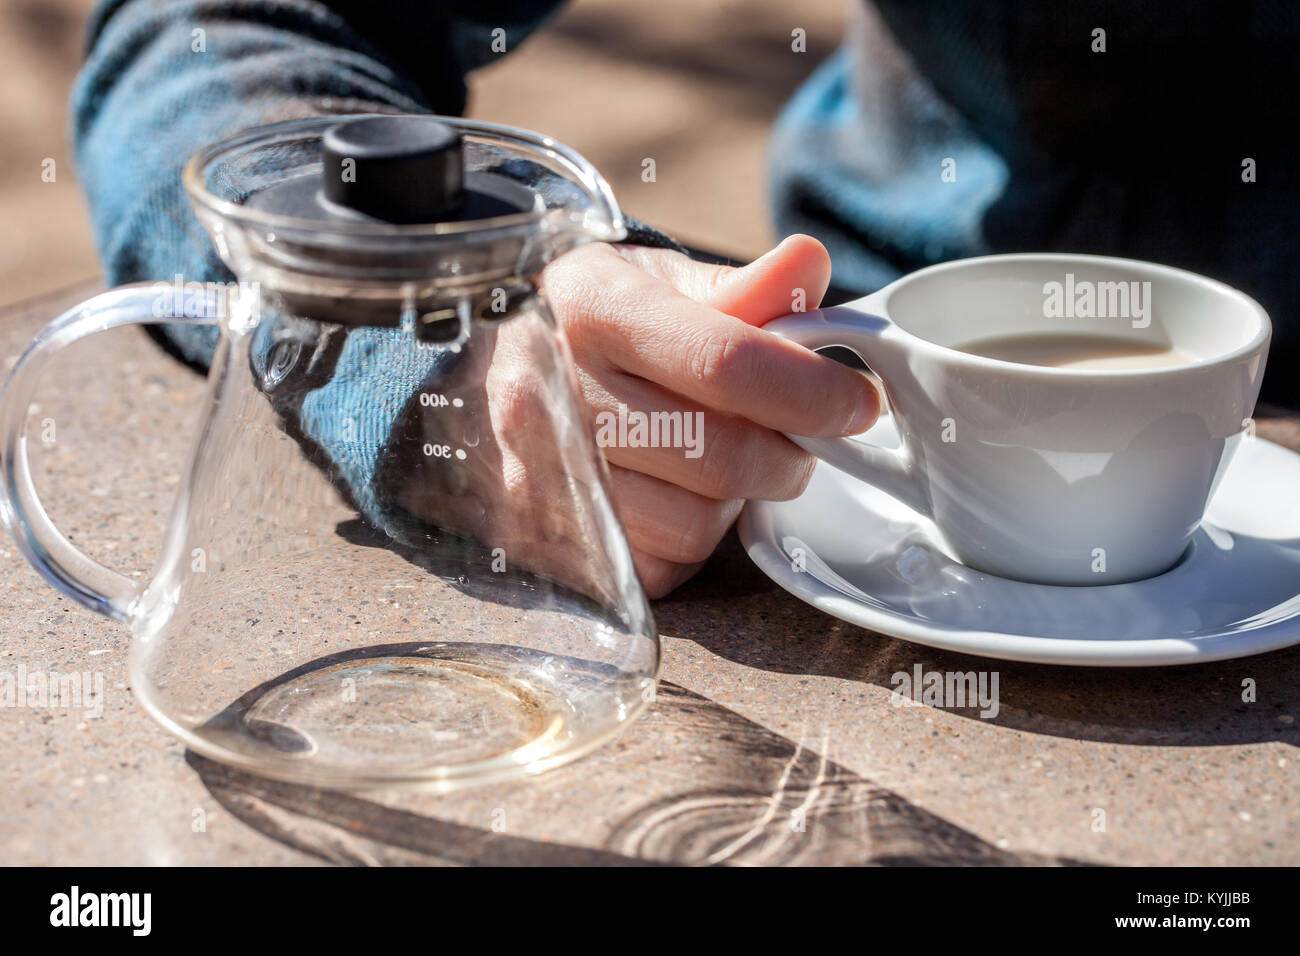 Caucasian woman hand holds ceramic cup with black tea and milk, empty glass teapot next to it Stock Photo